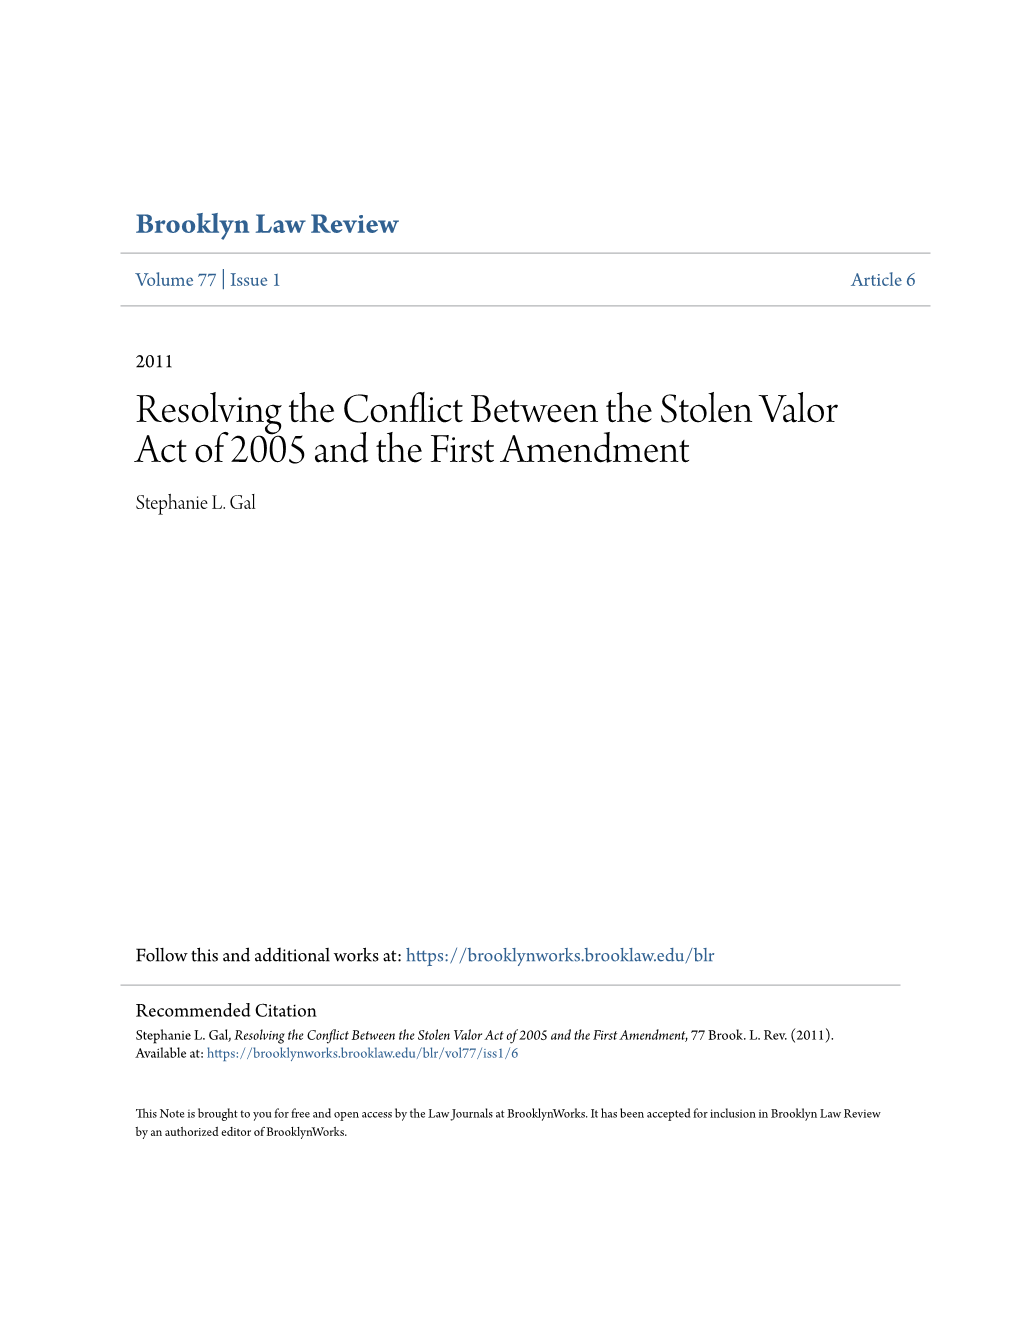 Resolving the Conflict Between the Stolen Valor Act of 2005 and the First Amendment Stephanie L